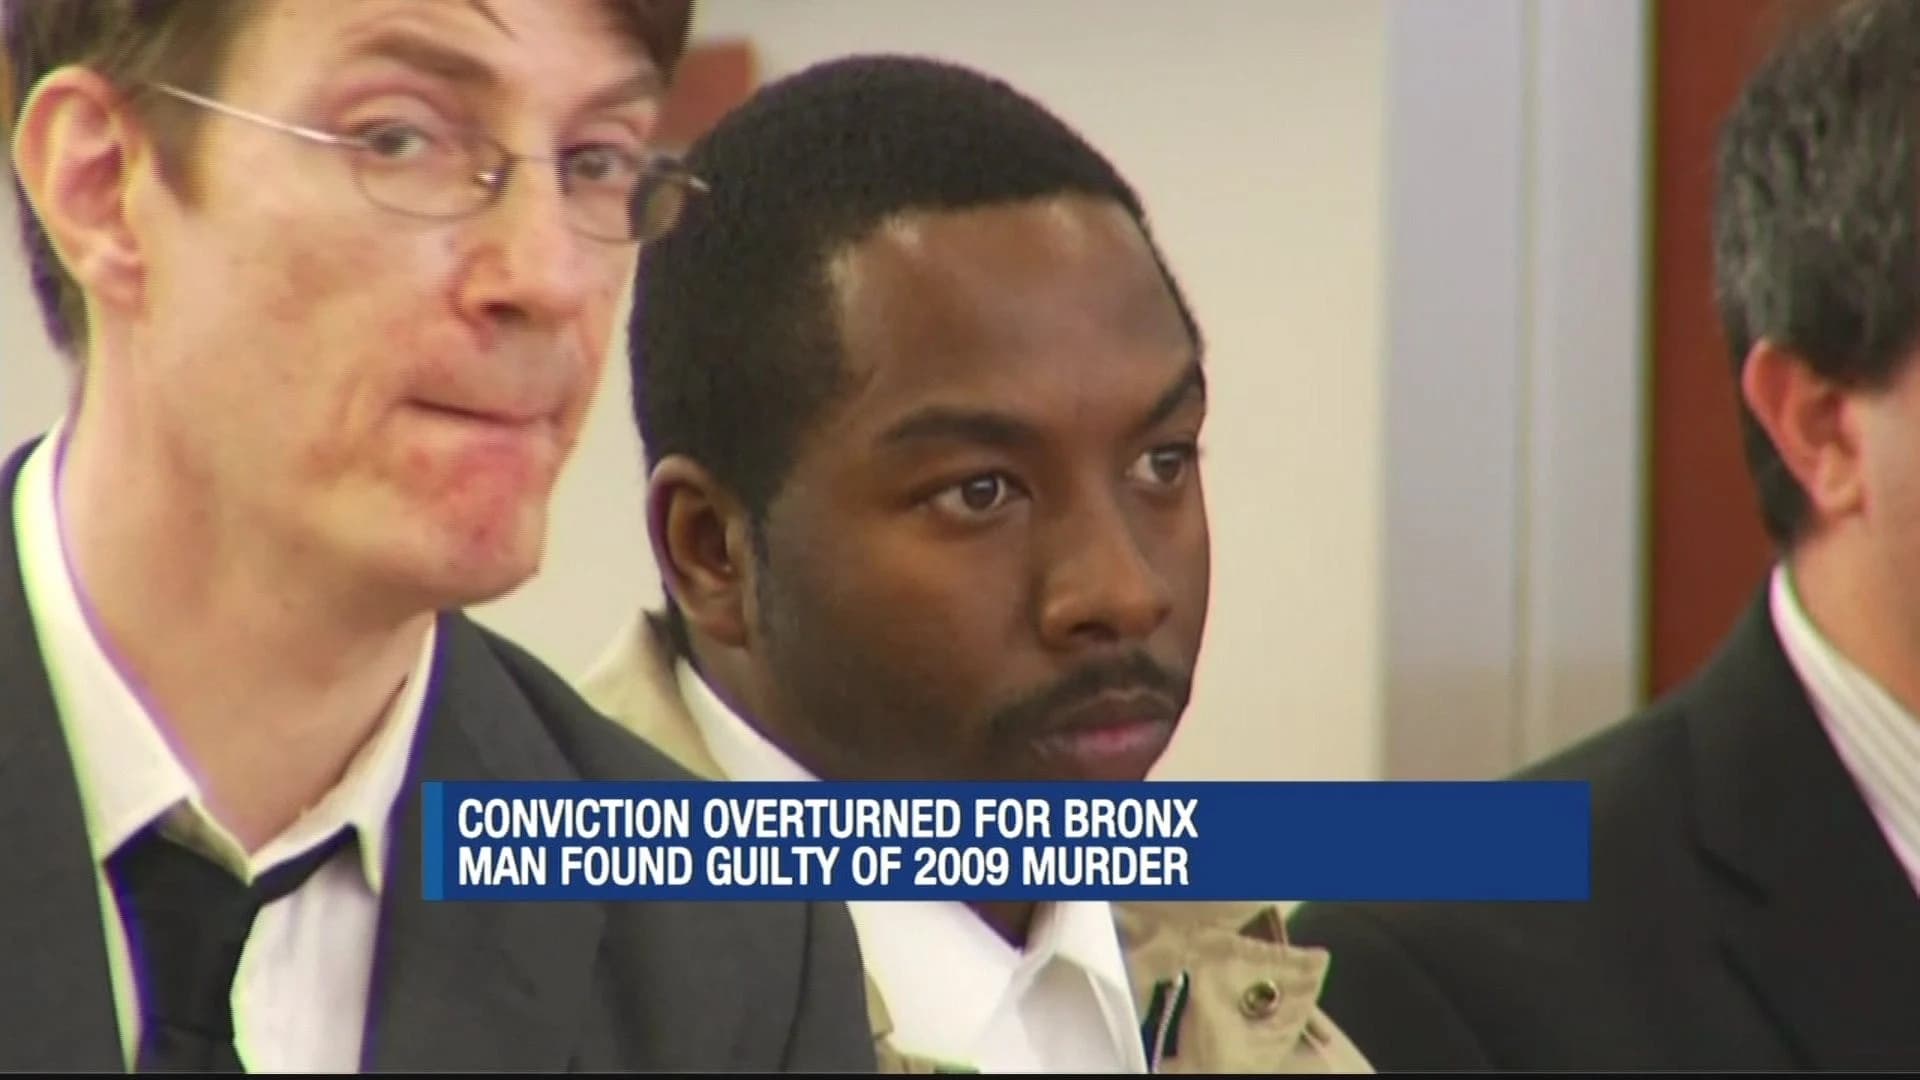 Conviction overturned for Bronx man found guilty of murder